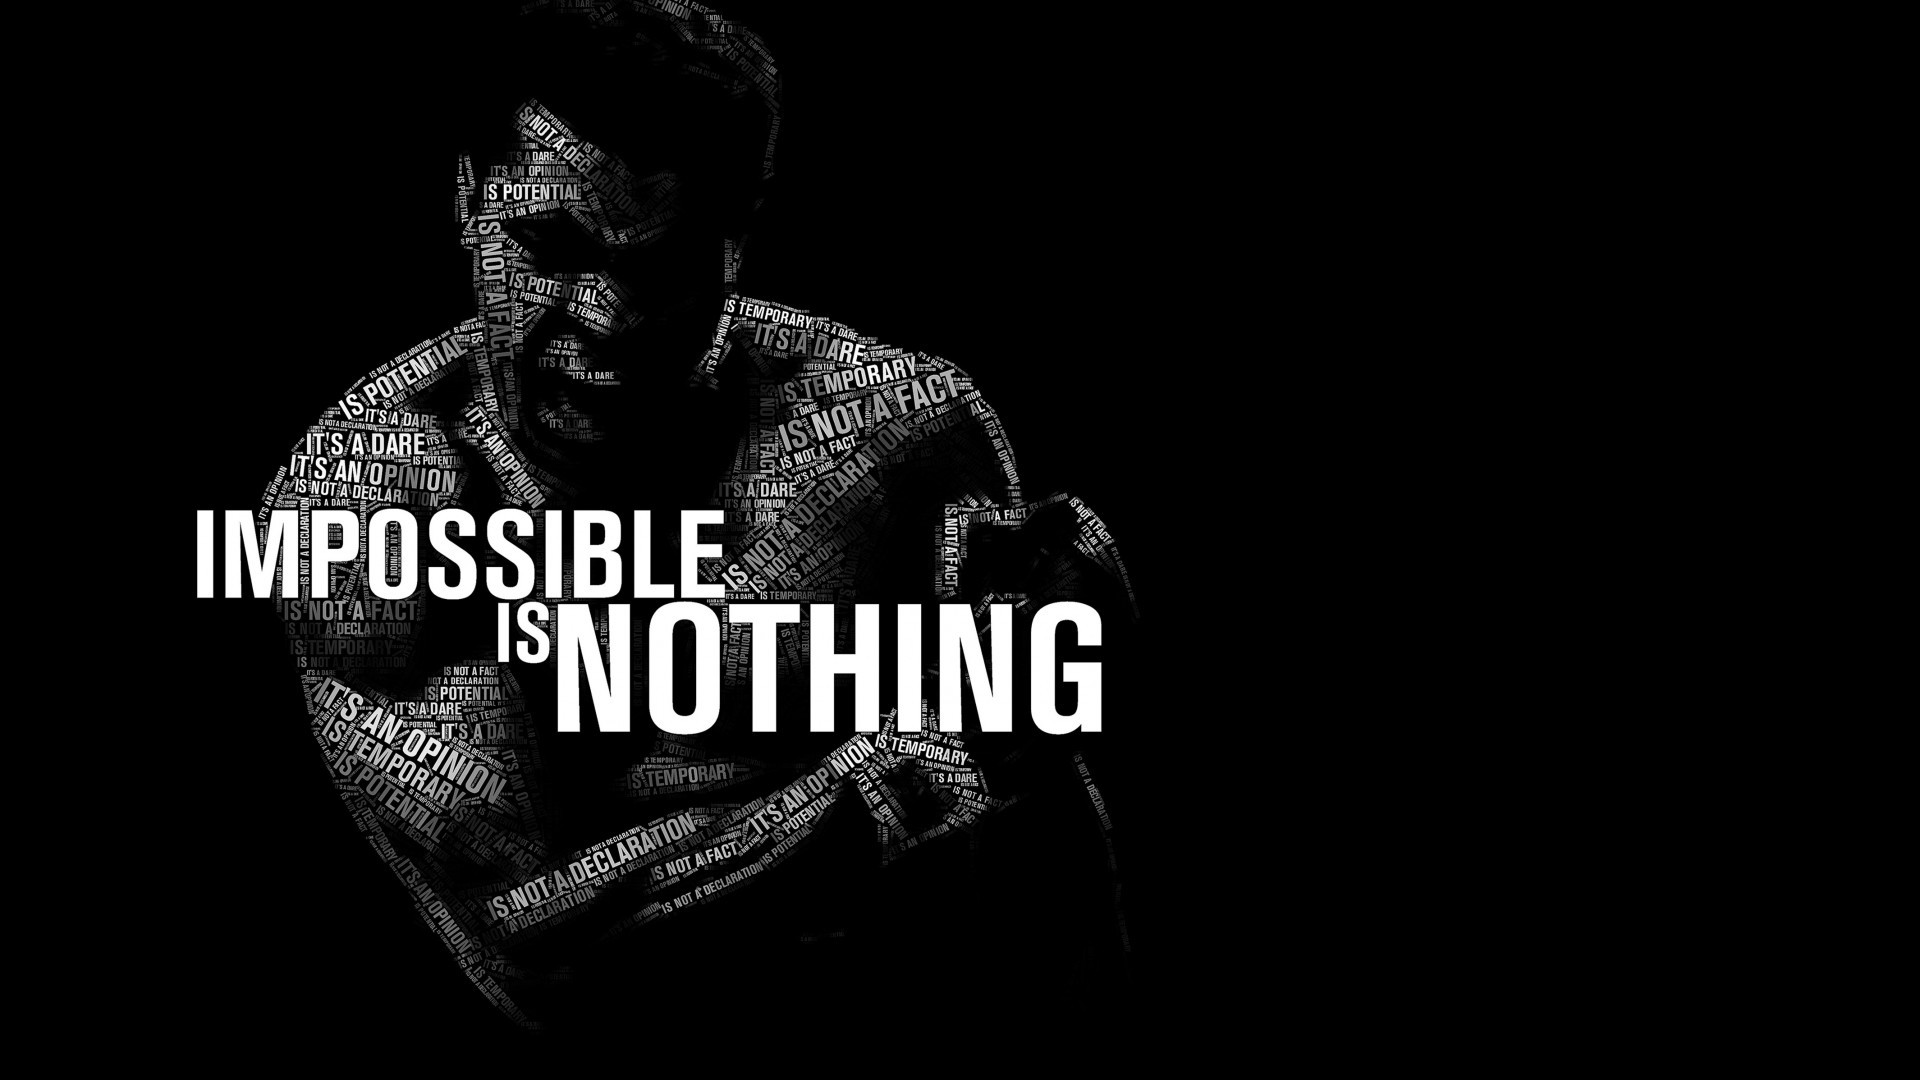 1920x1080 You transcended sports like no other. Ali Bomaye  https://www.hdwallpapers.net/quotes/impossible-is-nothing-muhammad-ali- wallpaper-548.htm